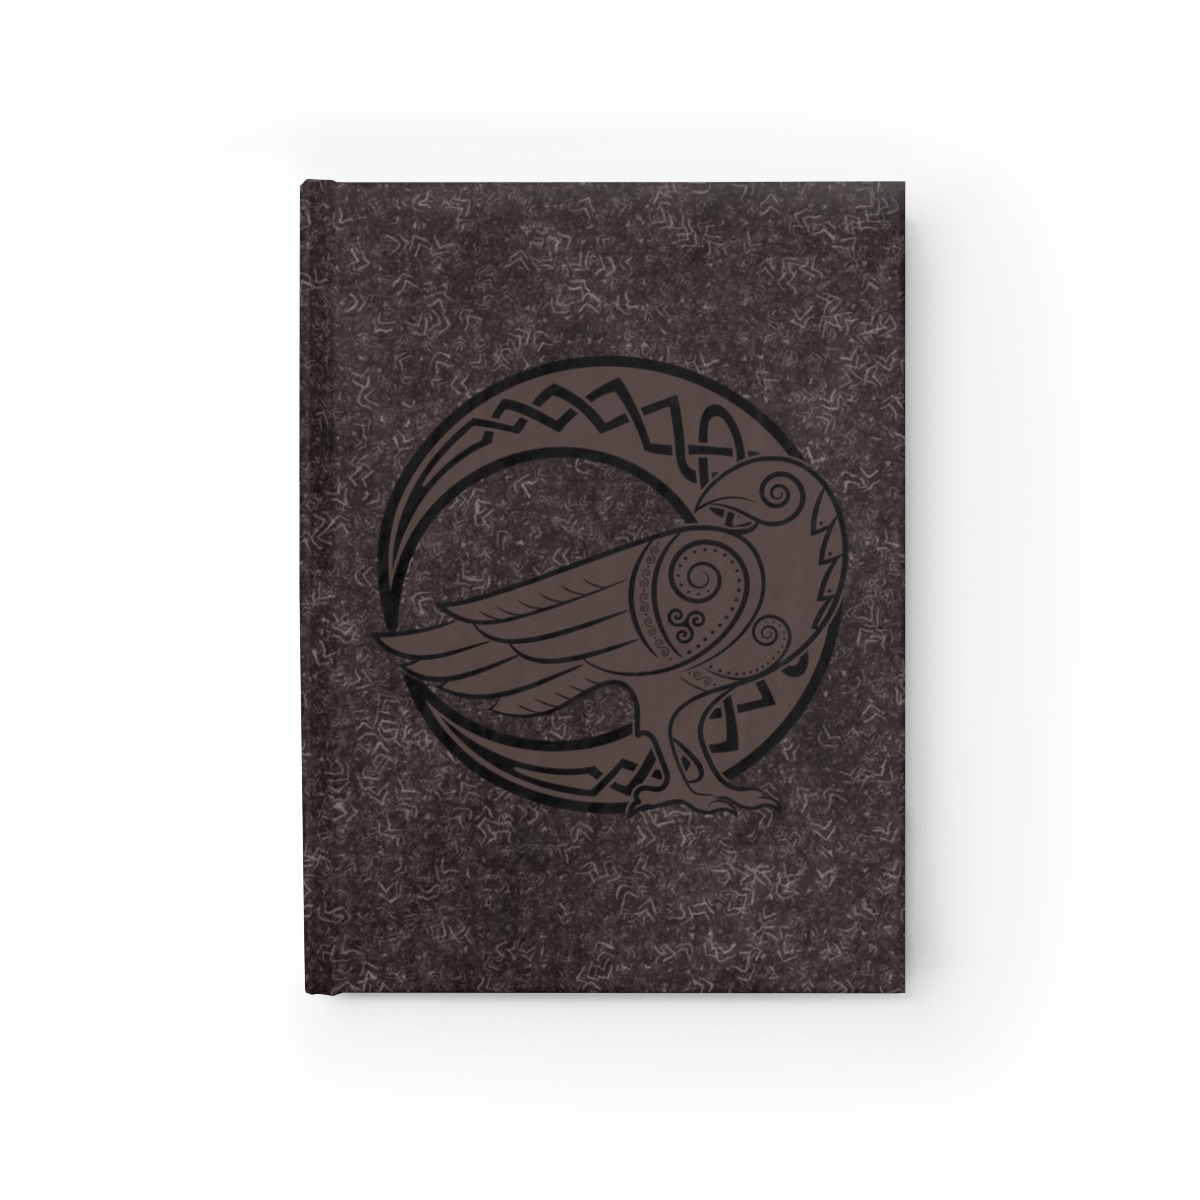 Brown Raven Crescent Moon Journal – Ruled Line